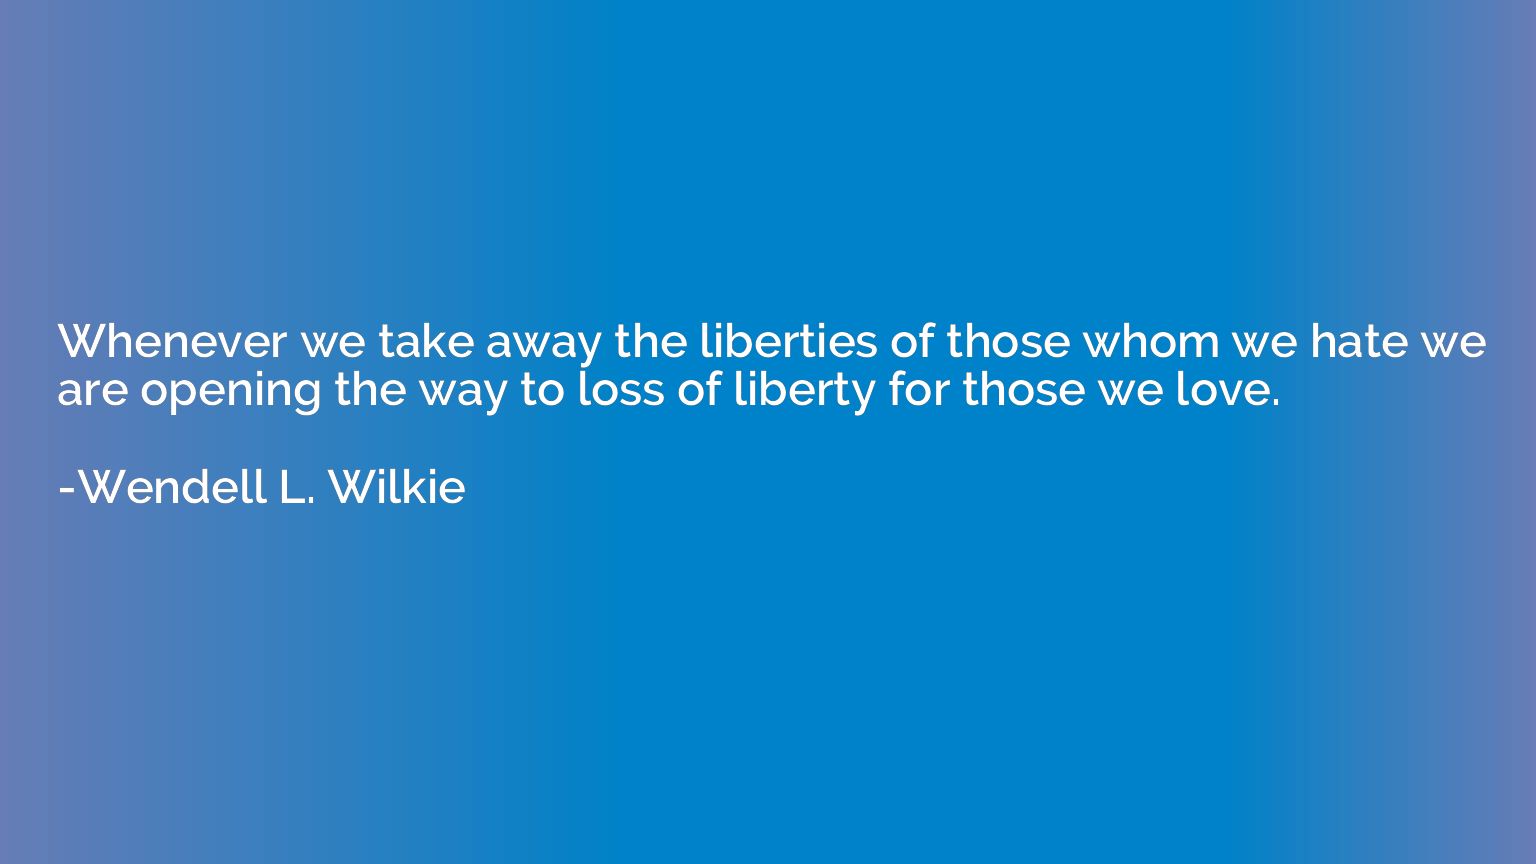 Whenever we take away the liberties of those whom we hate we